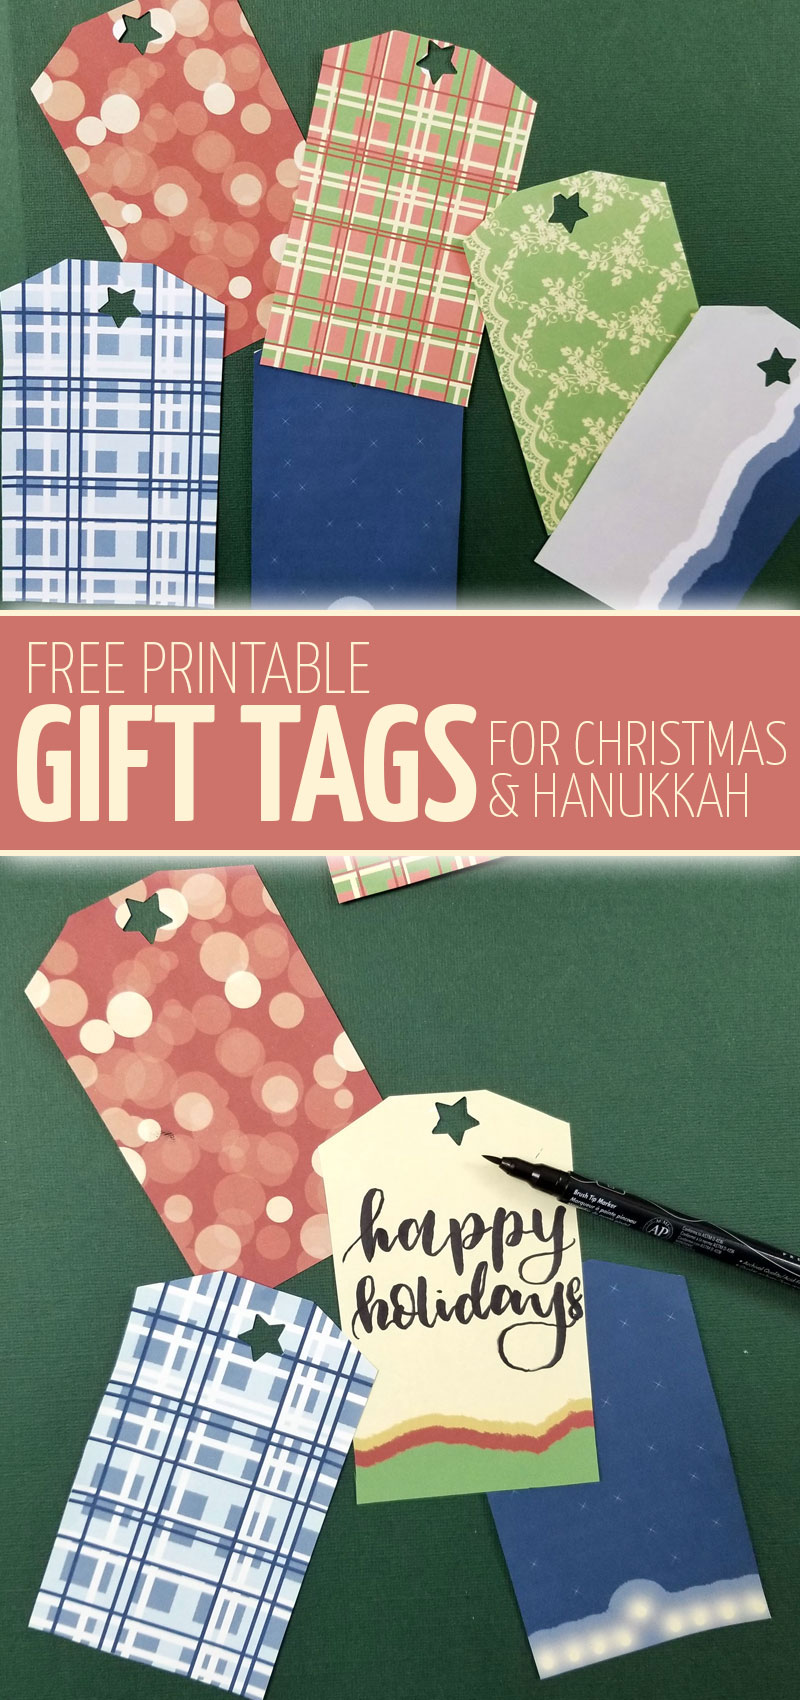 whether you celebrate Christmas or Hanukkah, grab these free printable holiday gift cards to make gift giving easier!